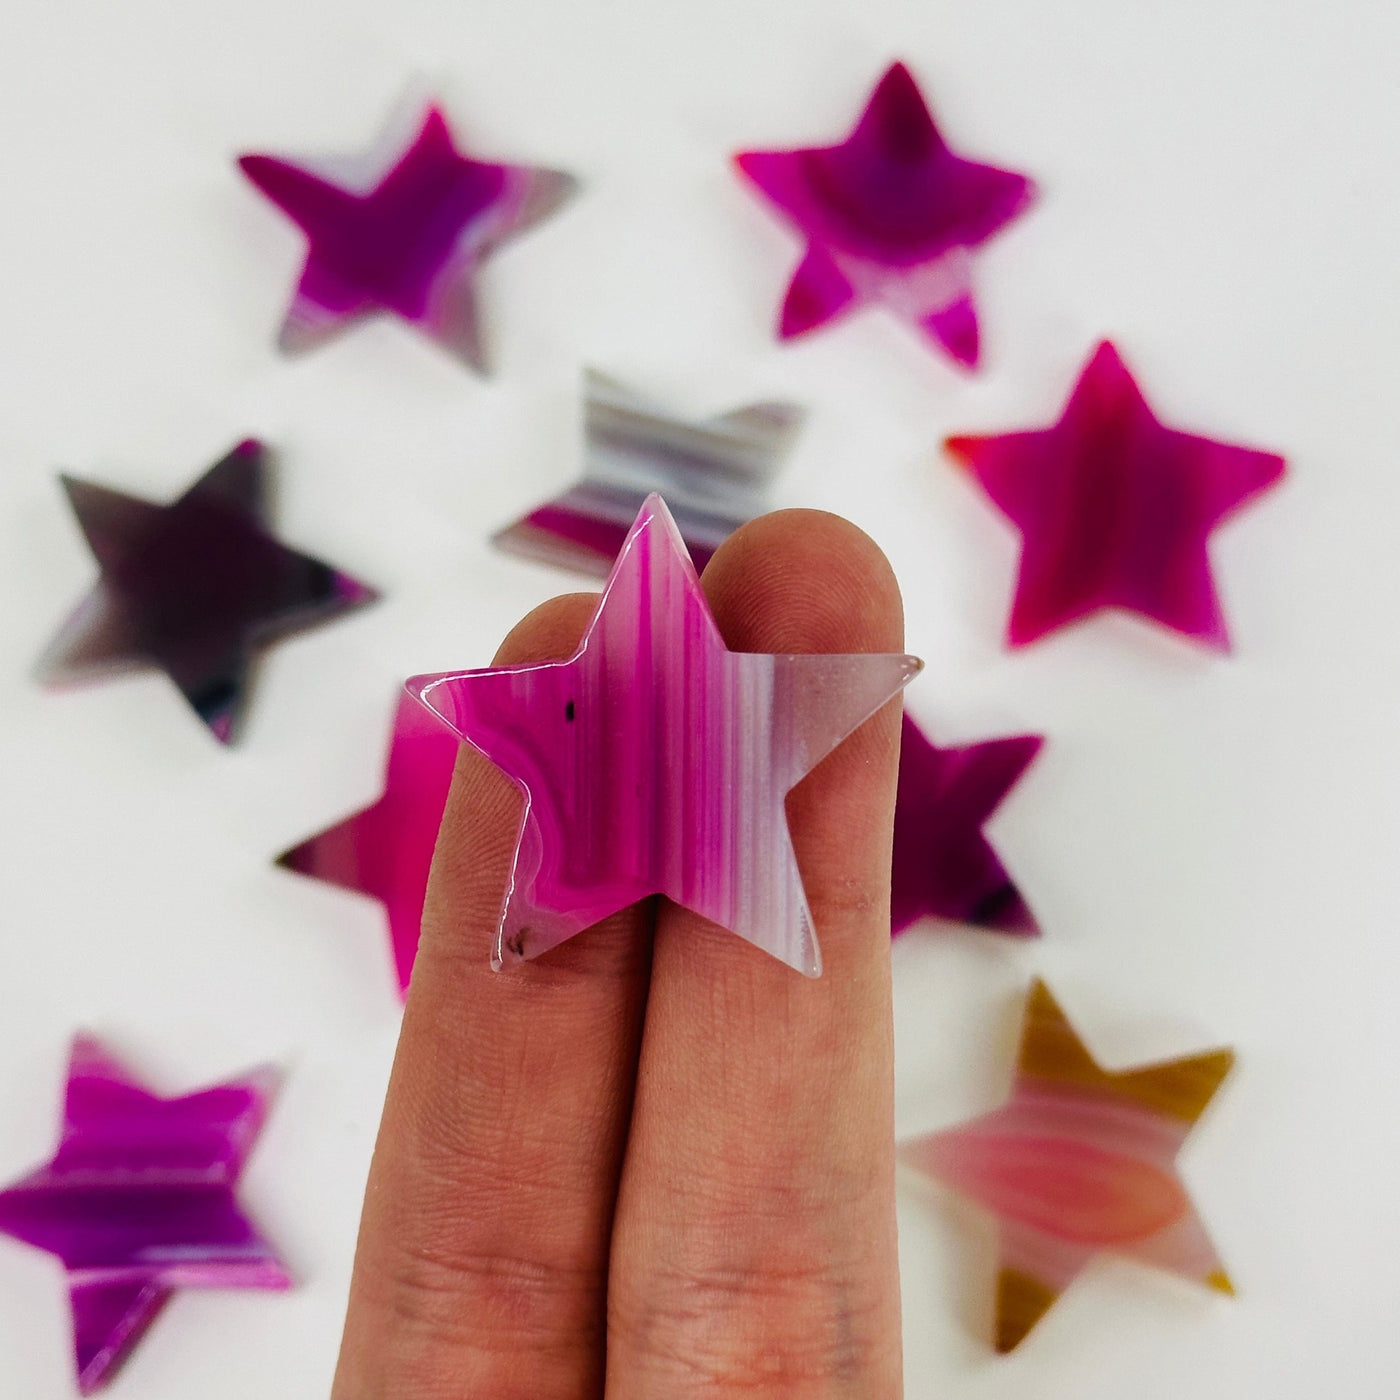 fingers holding up pink agate star with others in the background